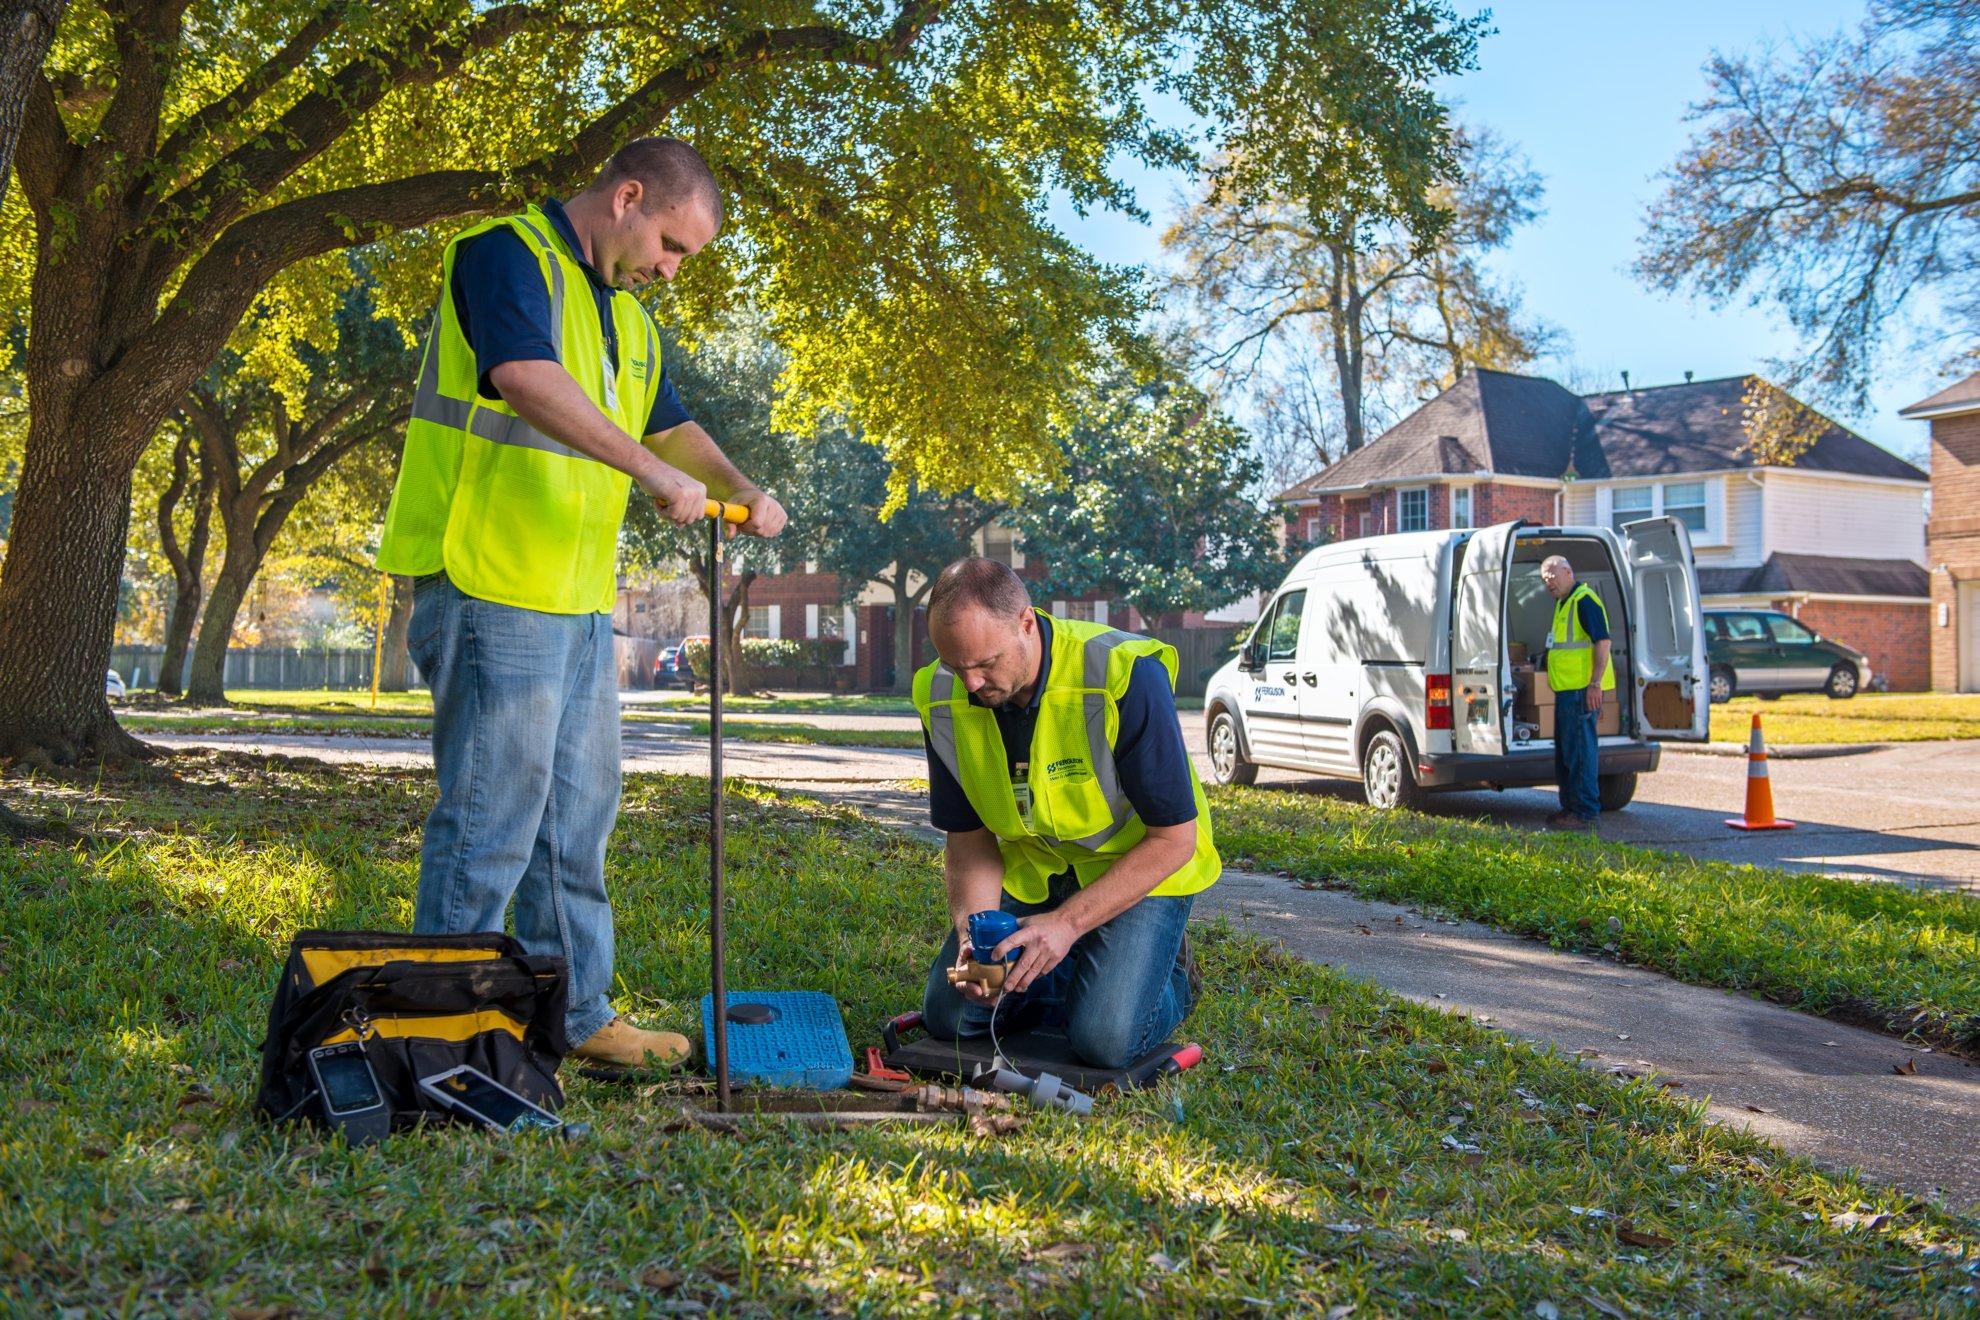 Three workers outside a parked Ferguson Waterworks van install a water meter in a front yard.